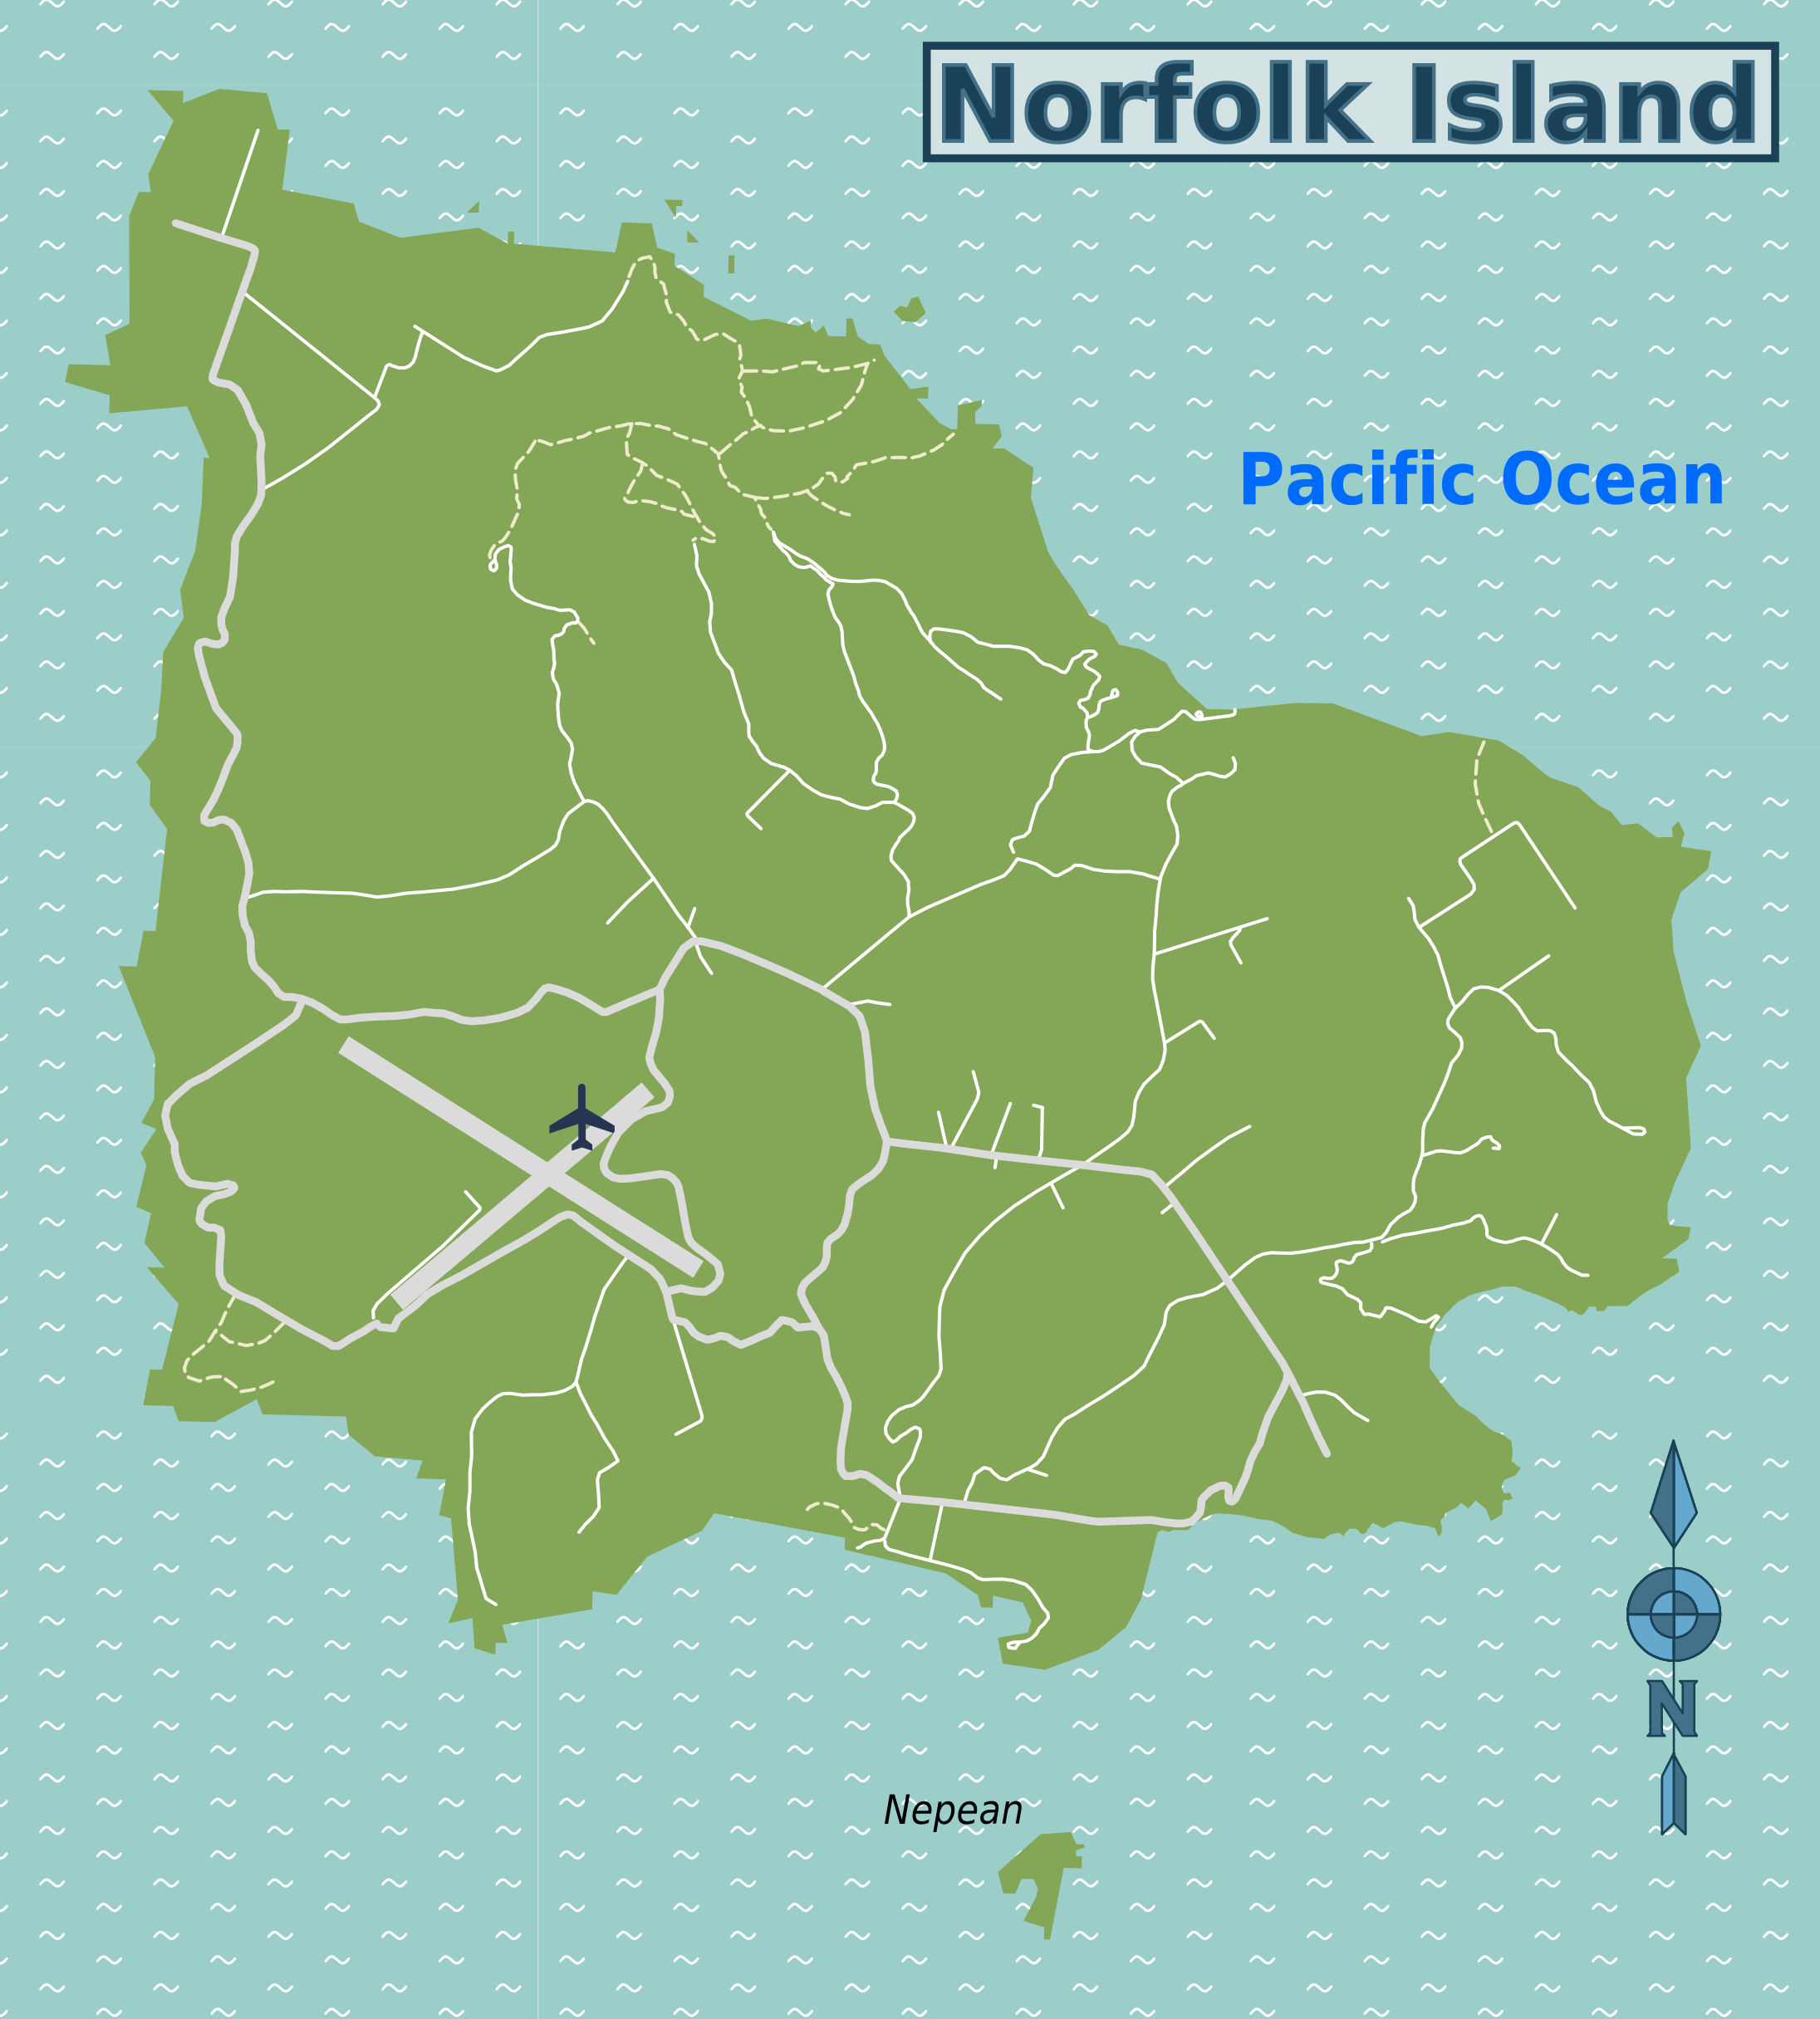 File:Norfolk Island travel map.png - Wikimedia Commons